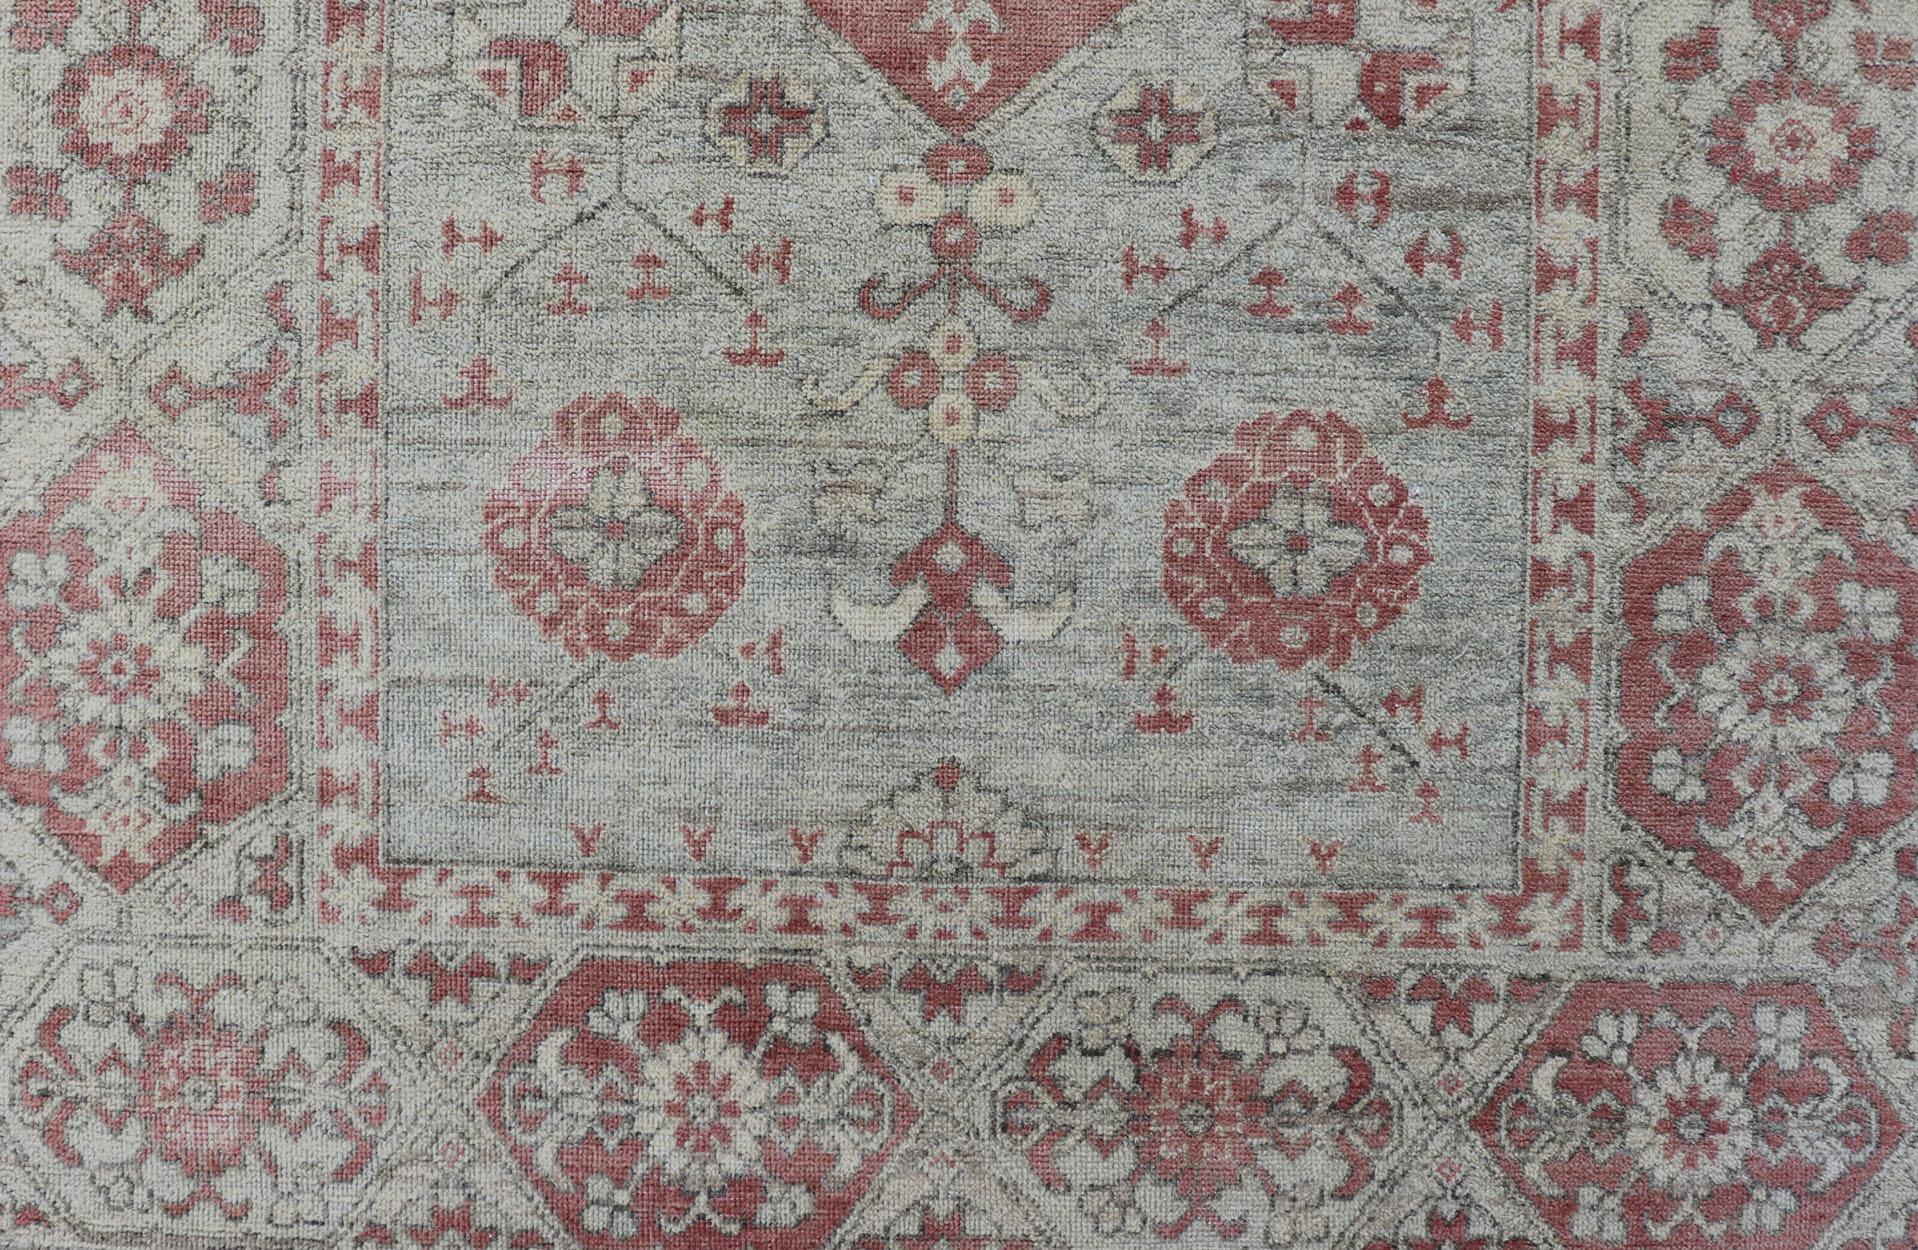 Hand-Knotted Modern Khotan Rug with Medallion Design by Keivan Woven Arts/rug/OB-9580377-83230118, country of origin / type: India / Khotan, circa Early 21st Century.

Measures: 5'10 x 8'10. 

Modern Oushak Rug in Wool with Medallion Design in Light